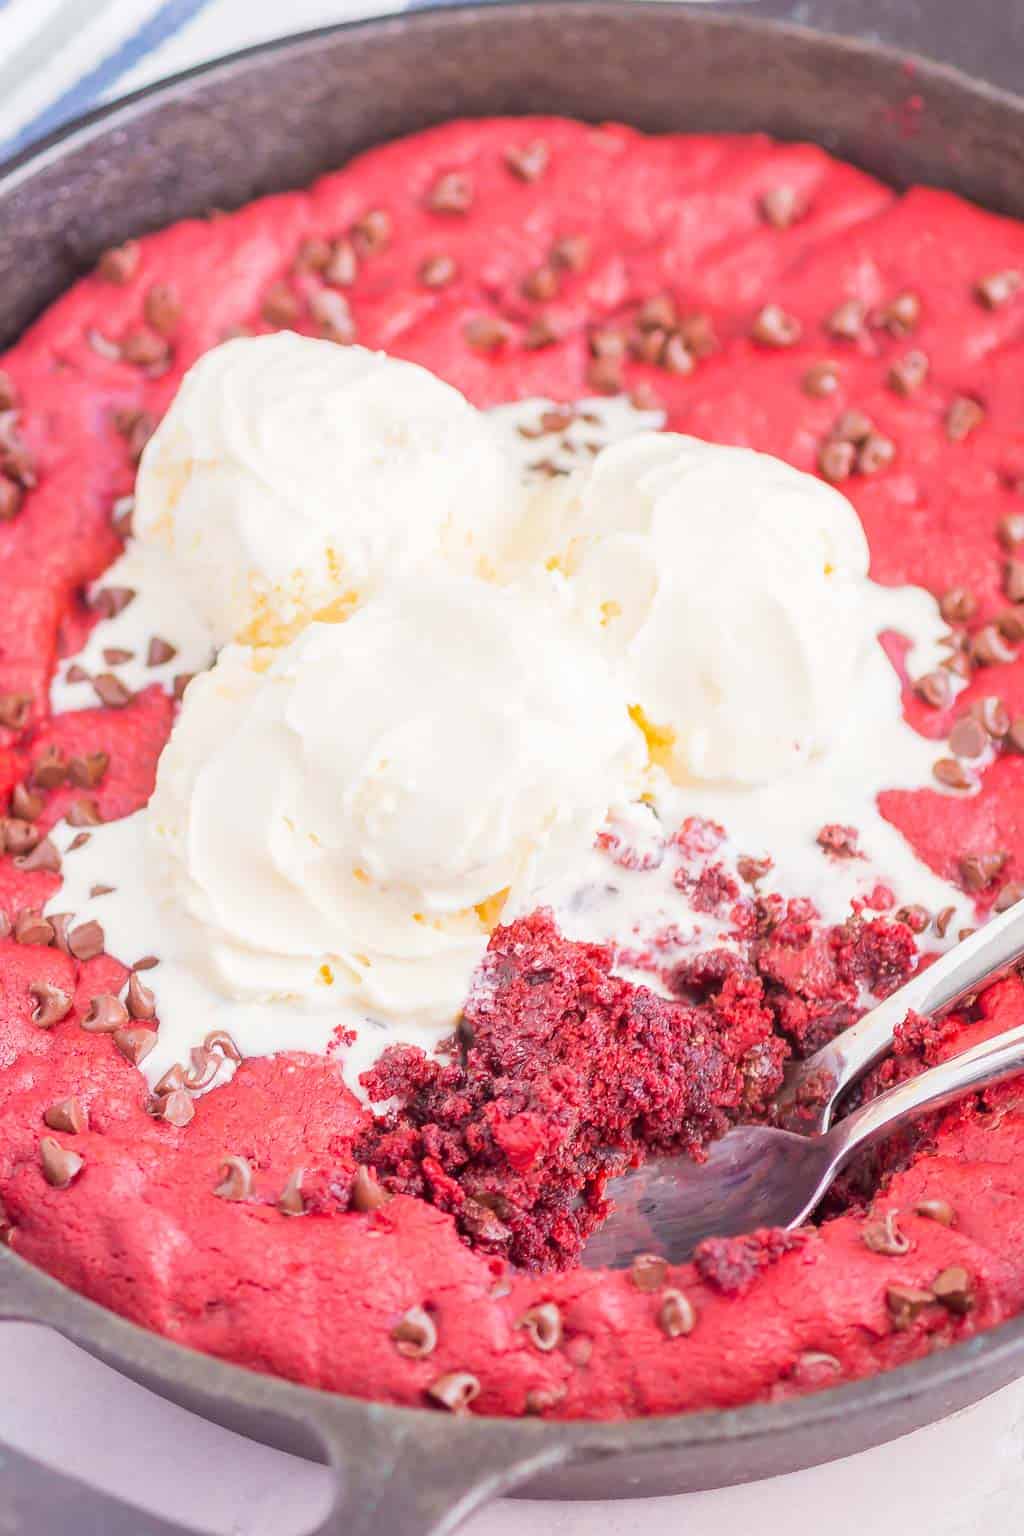 Red Velvet Skillet Cookie is thick and chewy, with a warm, gooey center. Baked in a skillet and topped with chocolate chips, you'll want to dig in with a big scoop of vanilla ice cream!